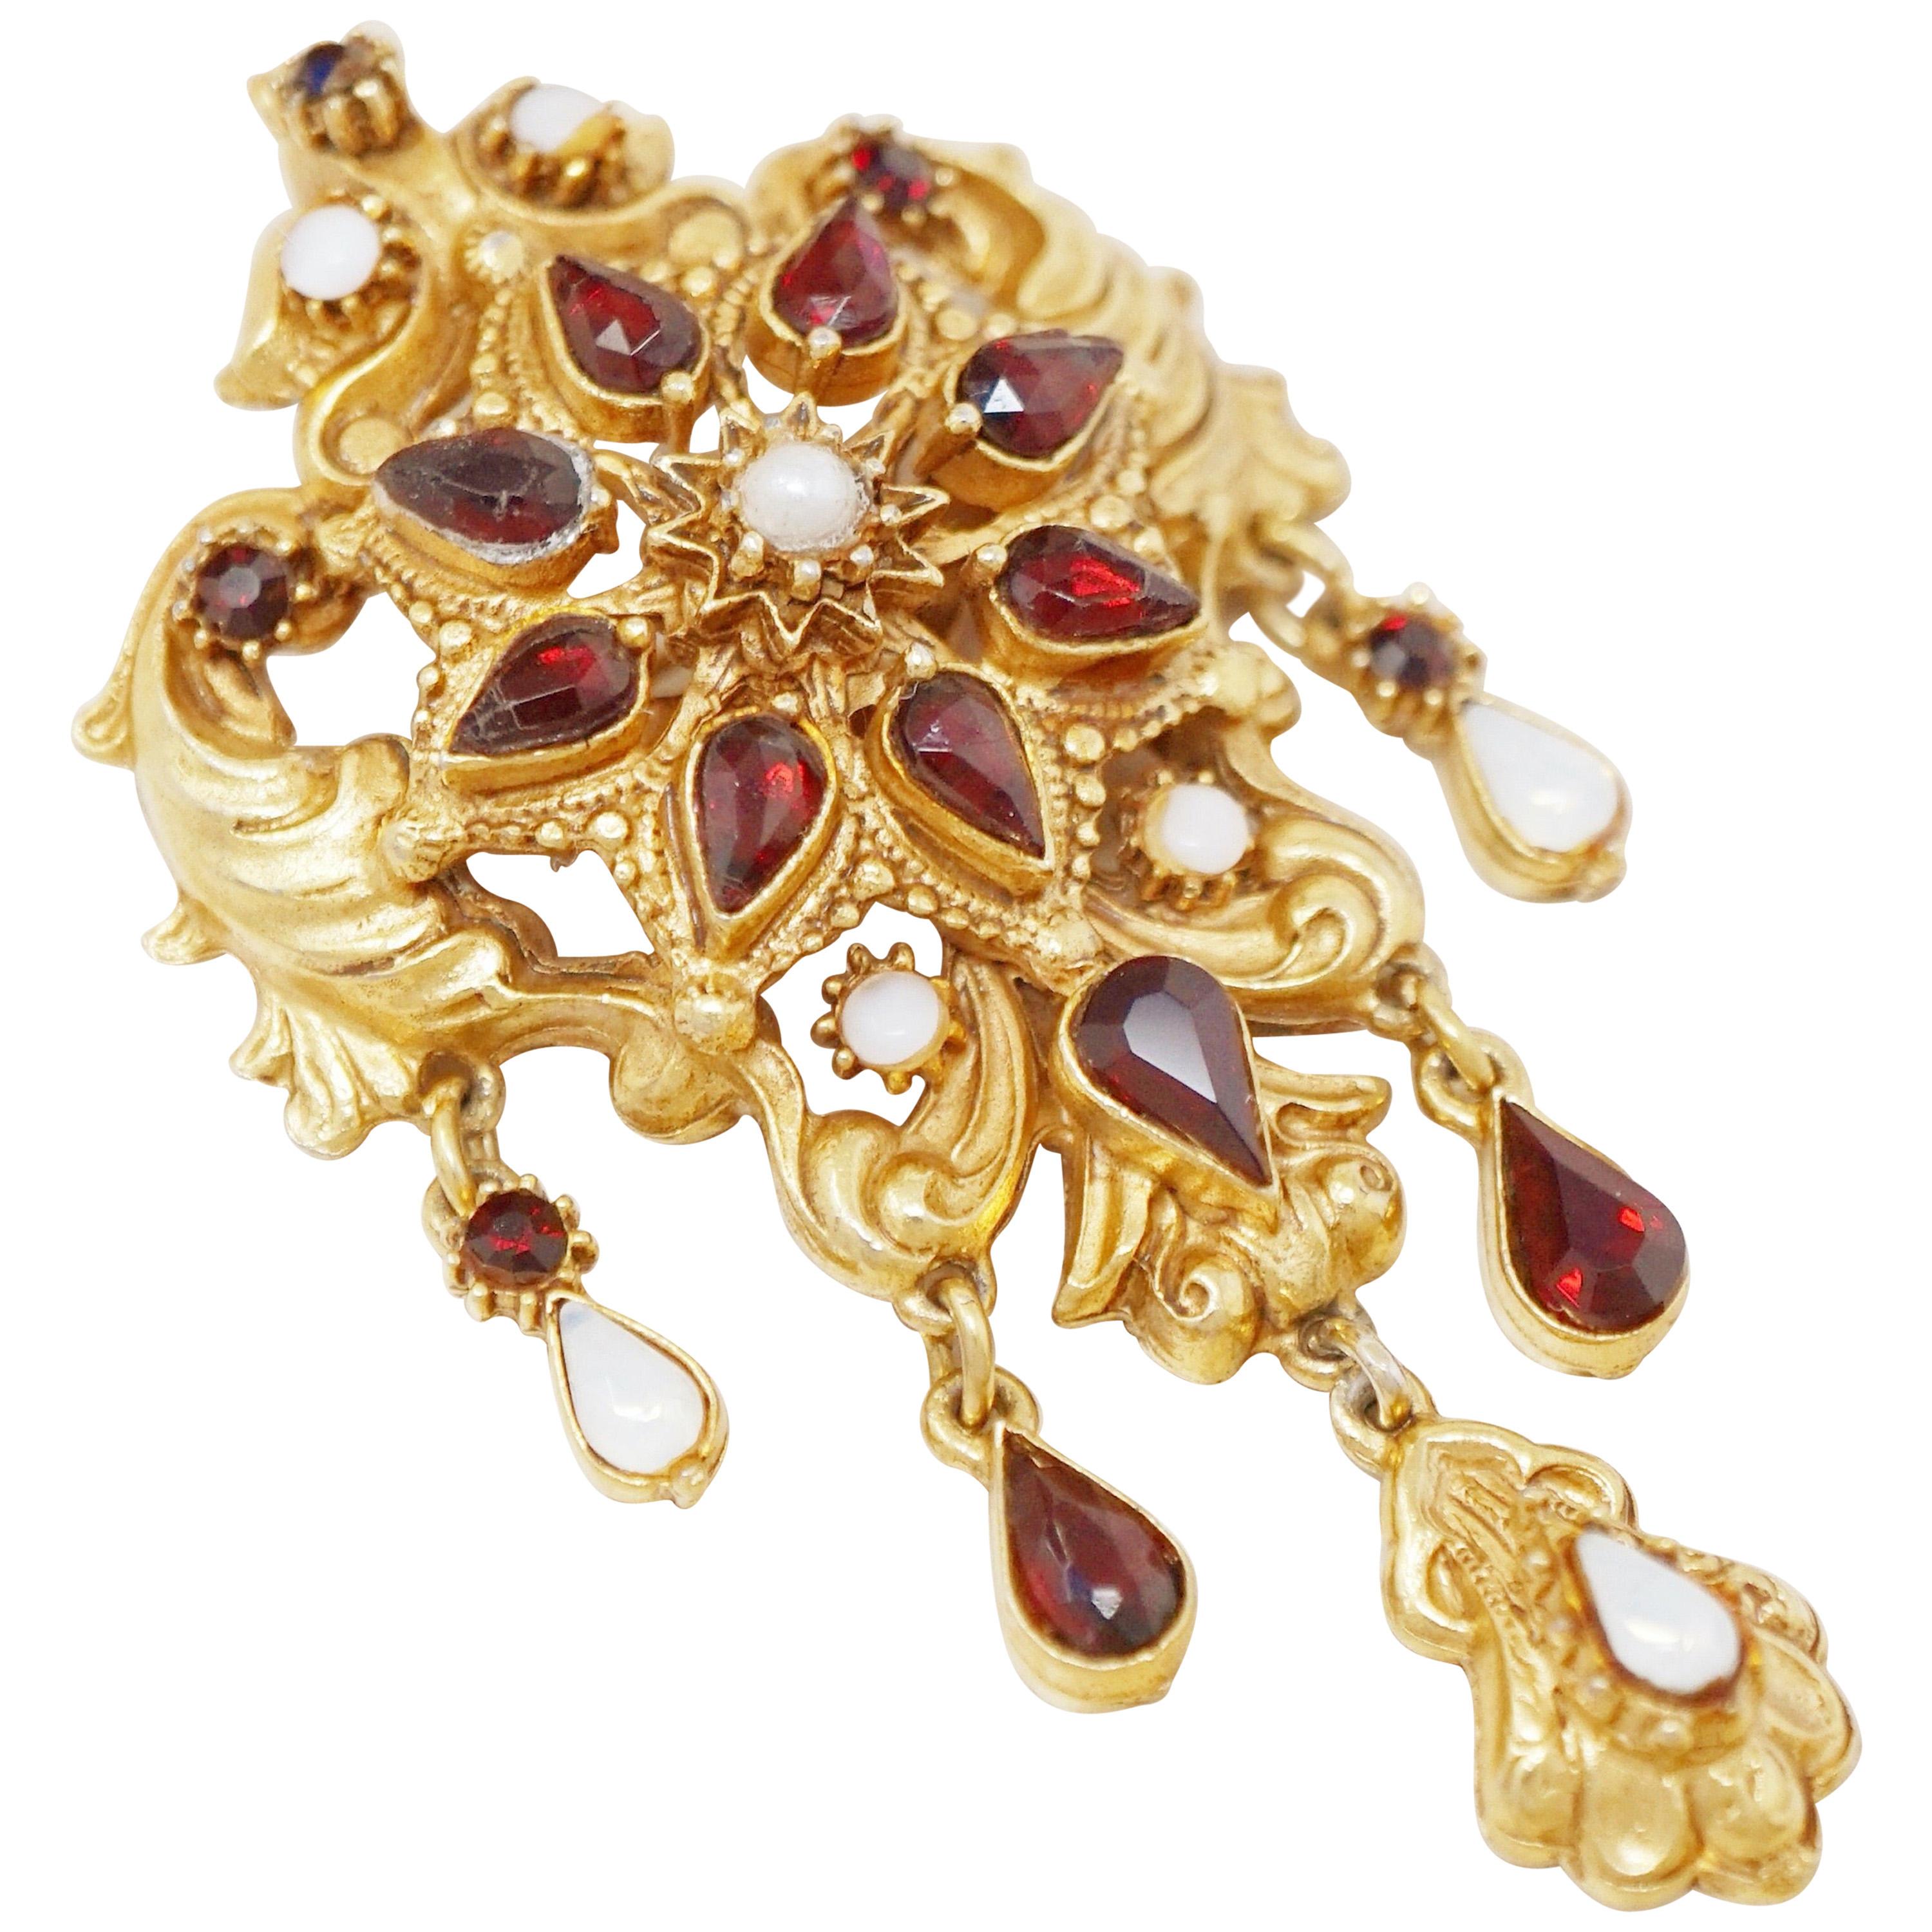 Victorian Revival Gilt Brooch with Garnet & Opal Rhinestones by Florenza, 1960s For Sale